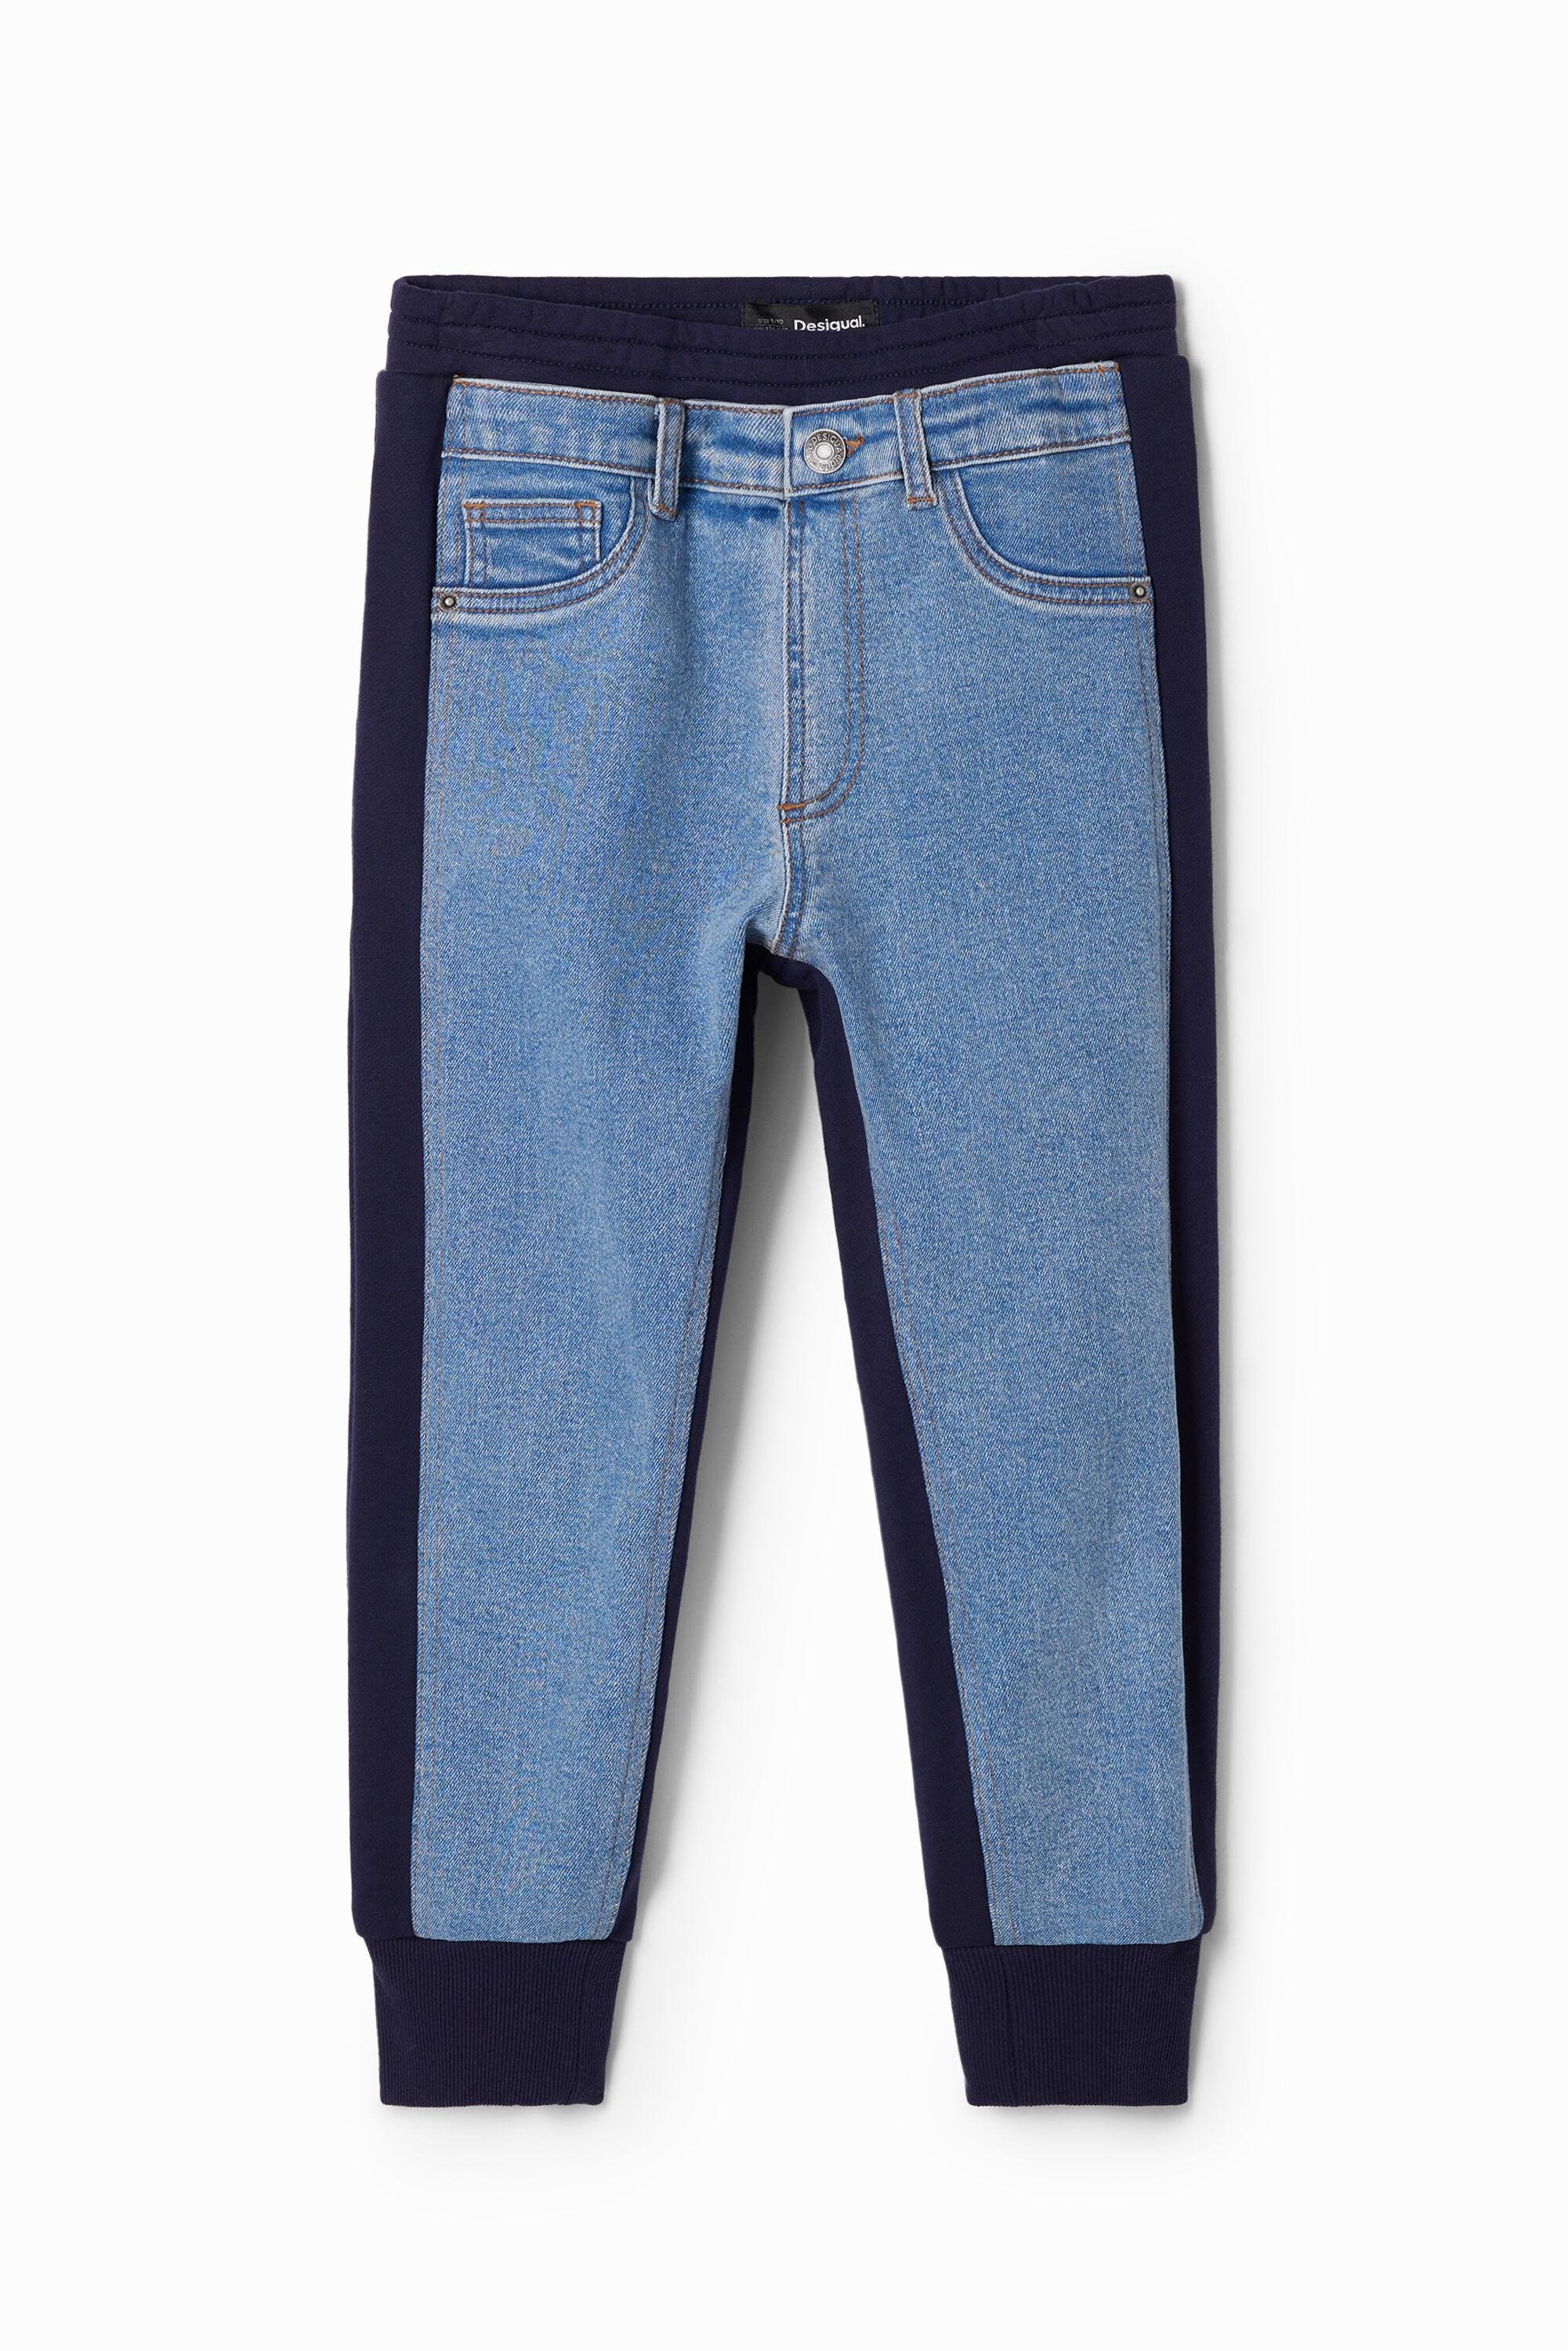 Denim jogger trousers by DESIGUAL